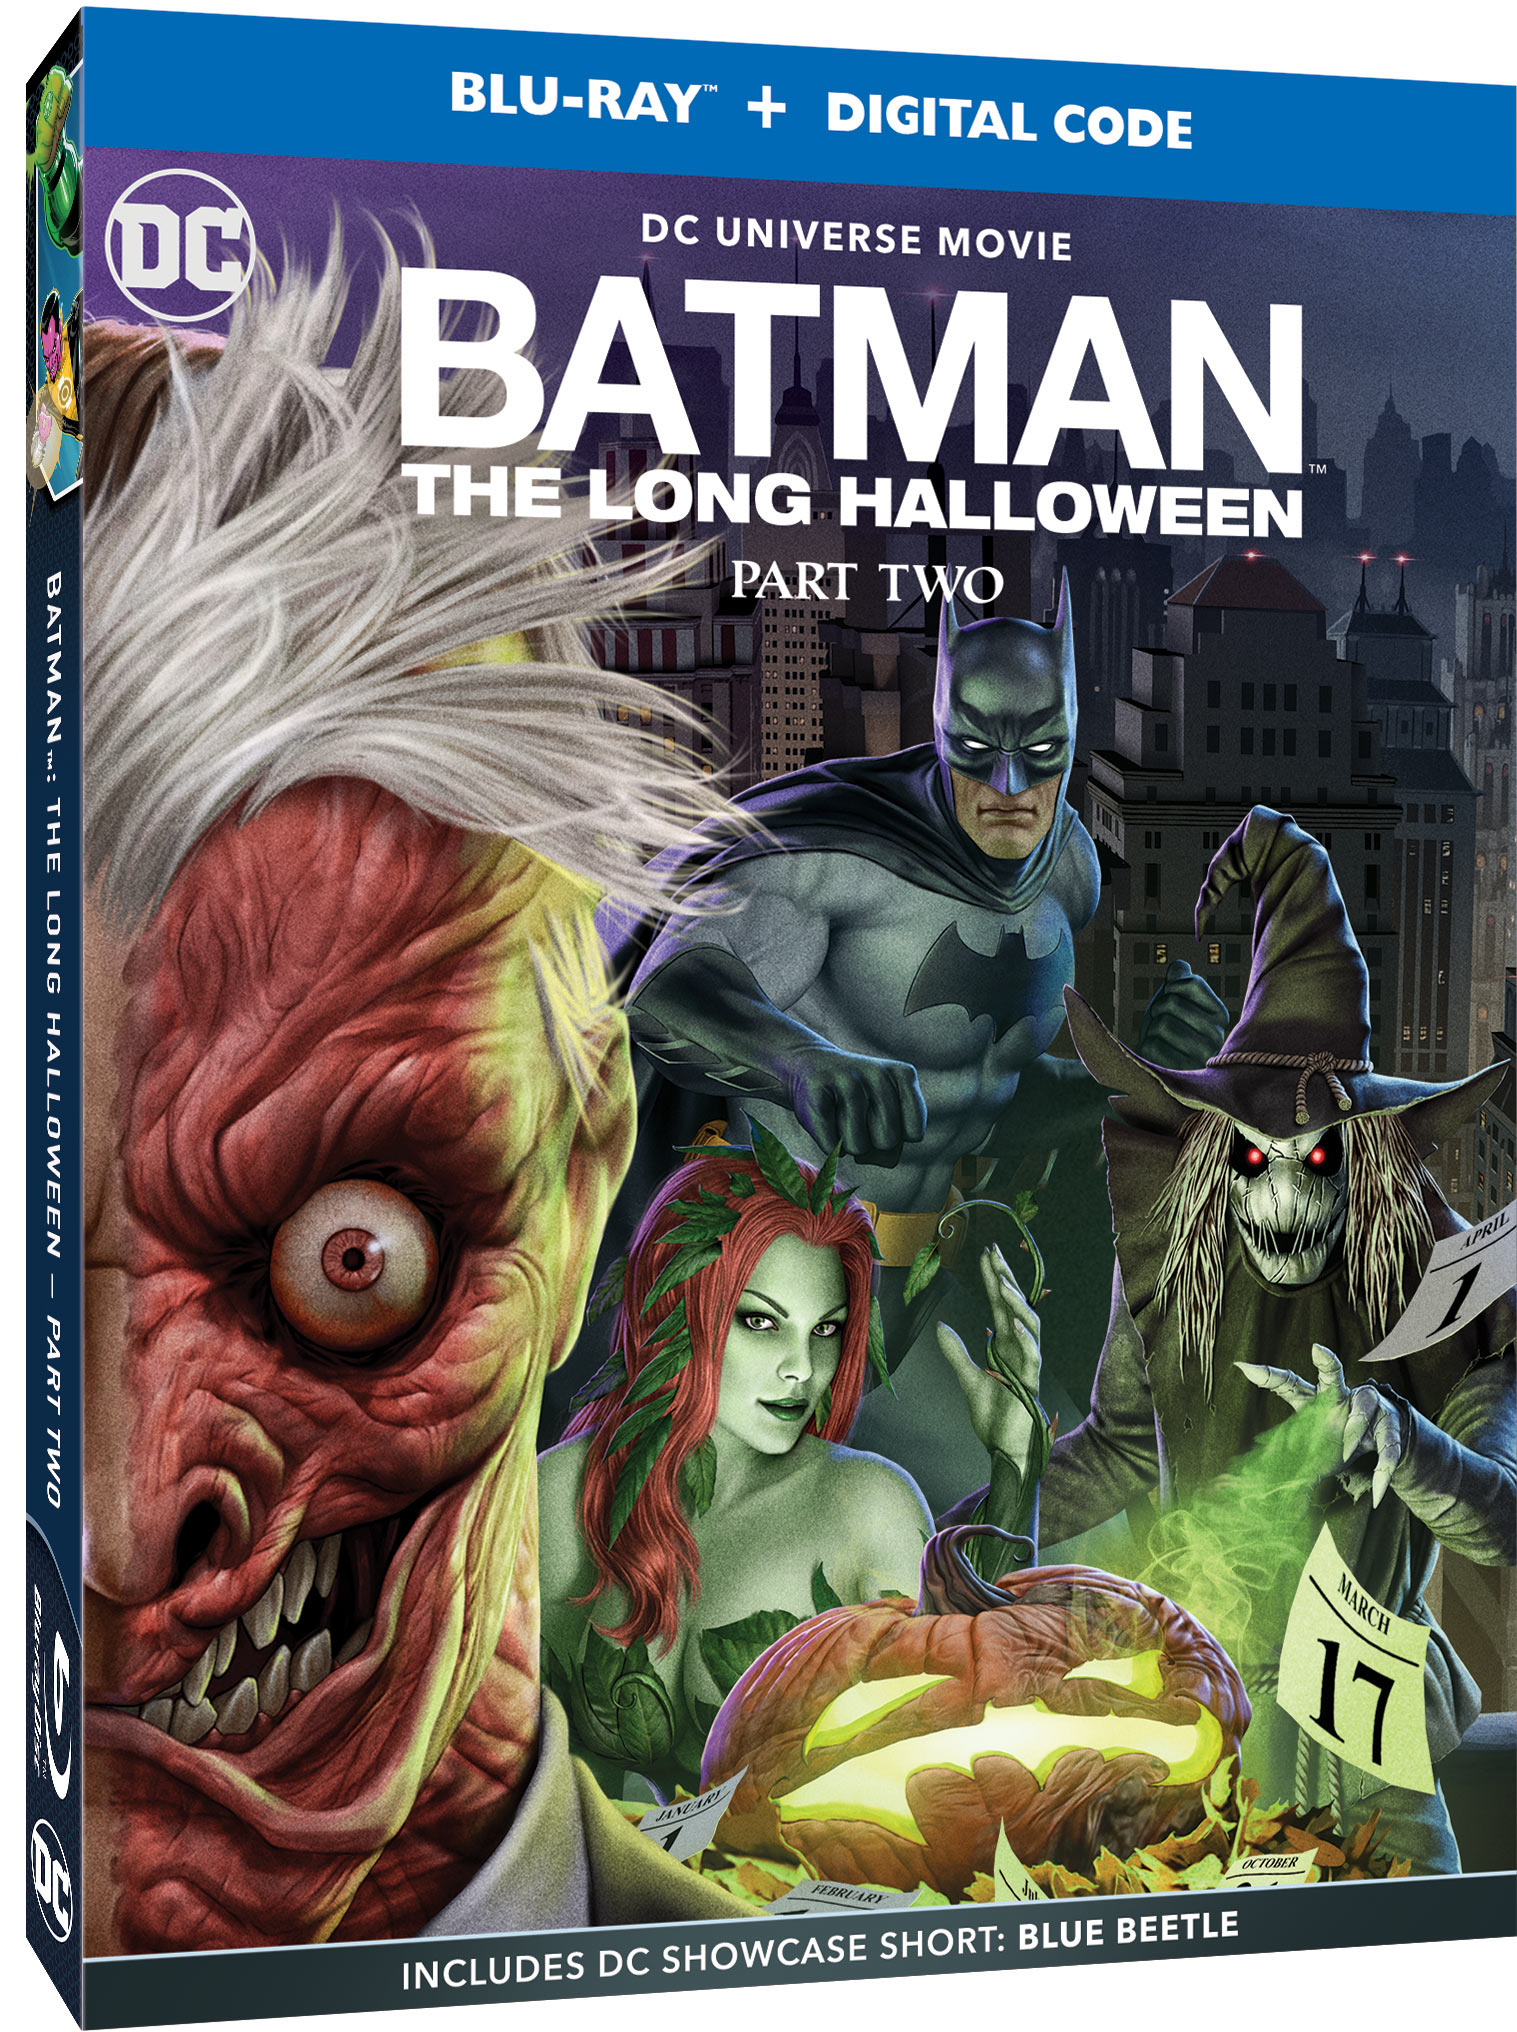 123movies - Batman: The Long Halloween, Part Two Watch here for free